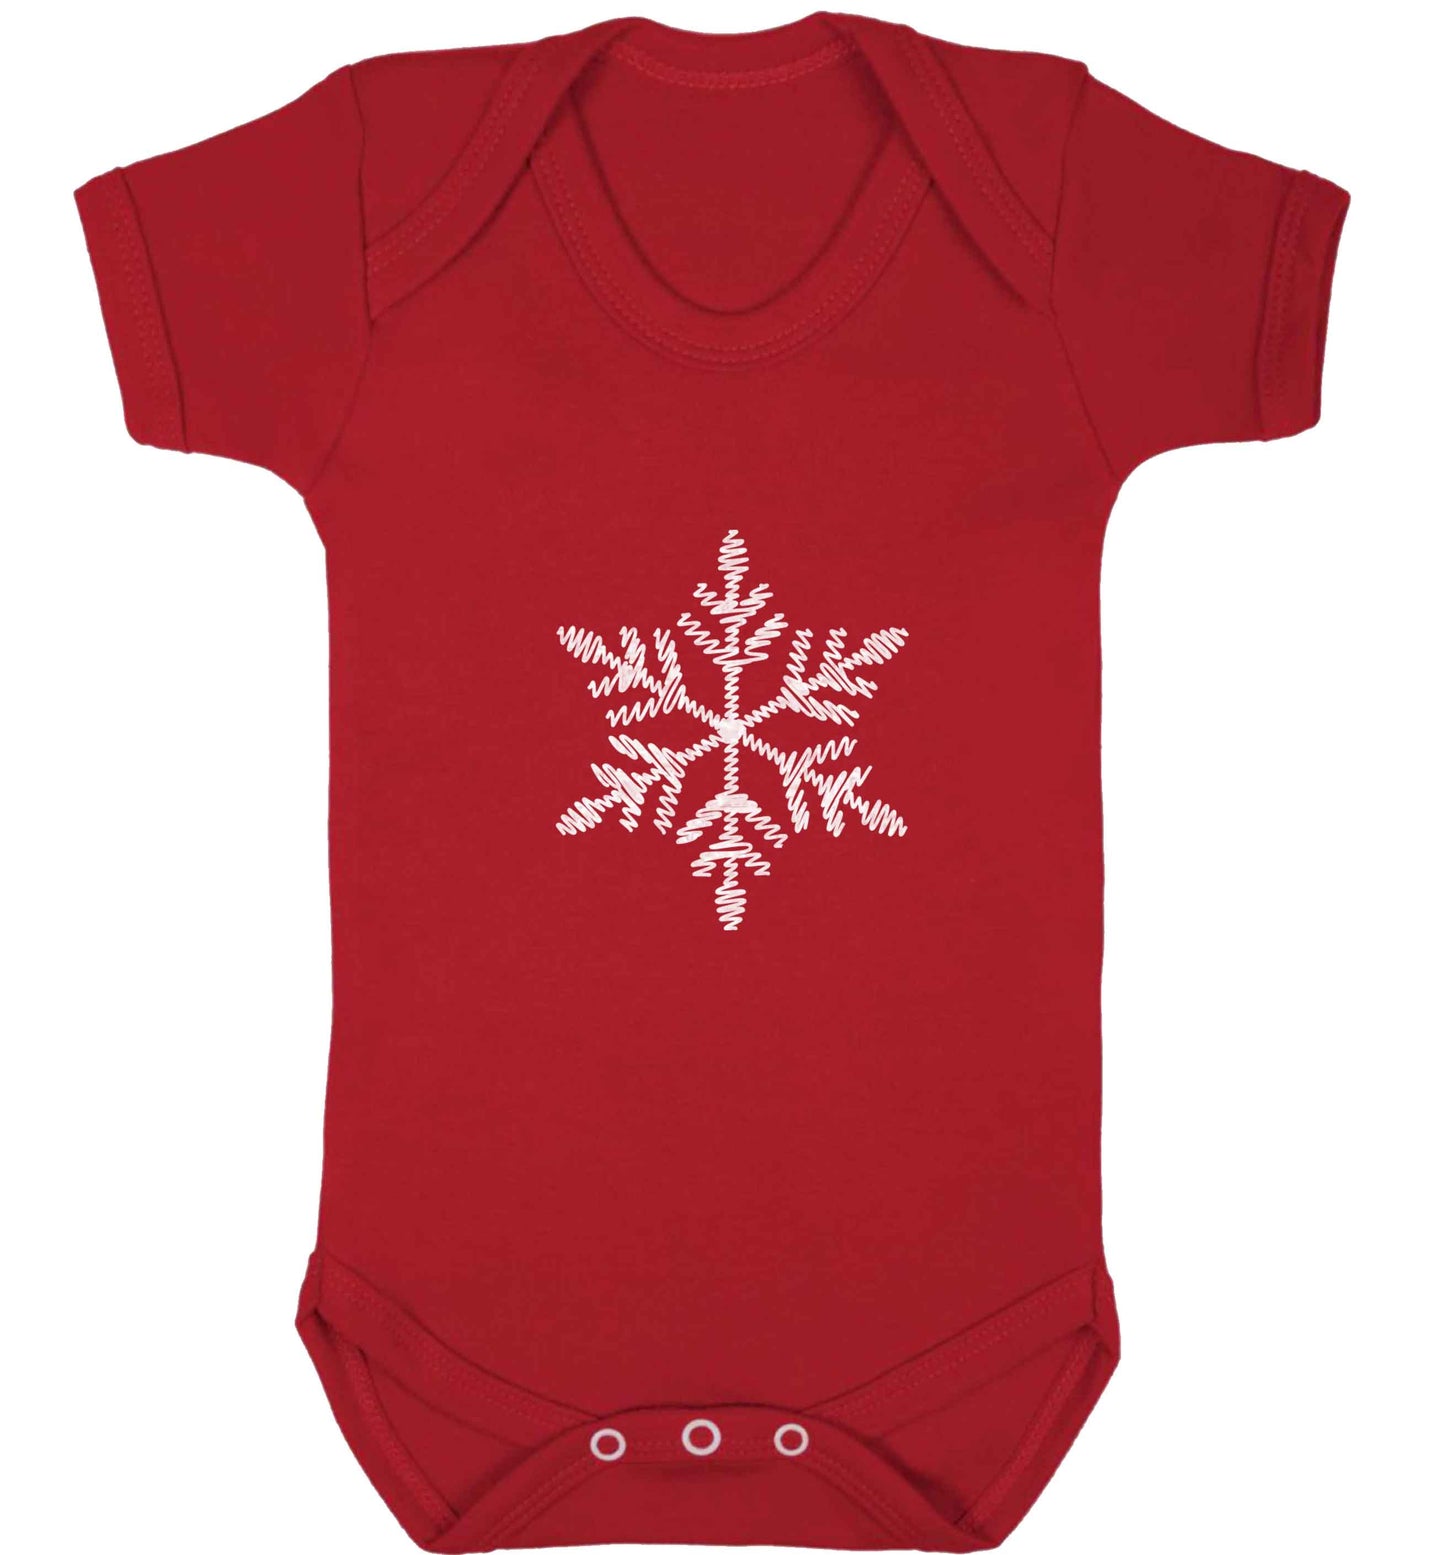 Snowflake baby vest red 18-24 months